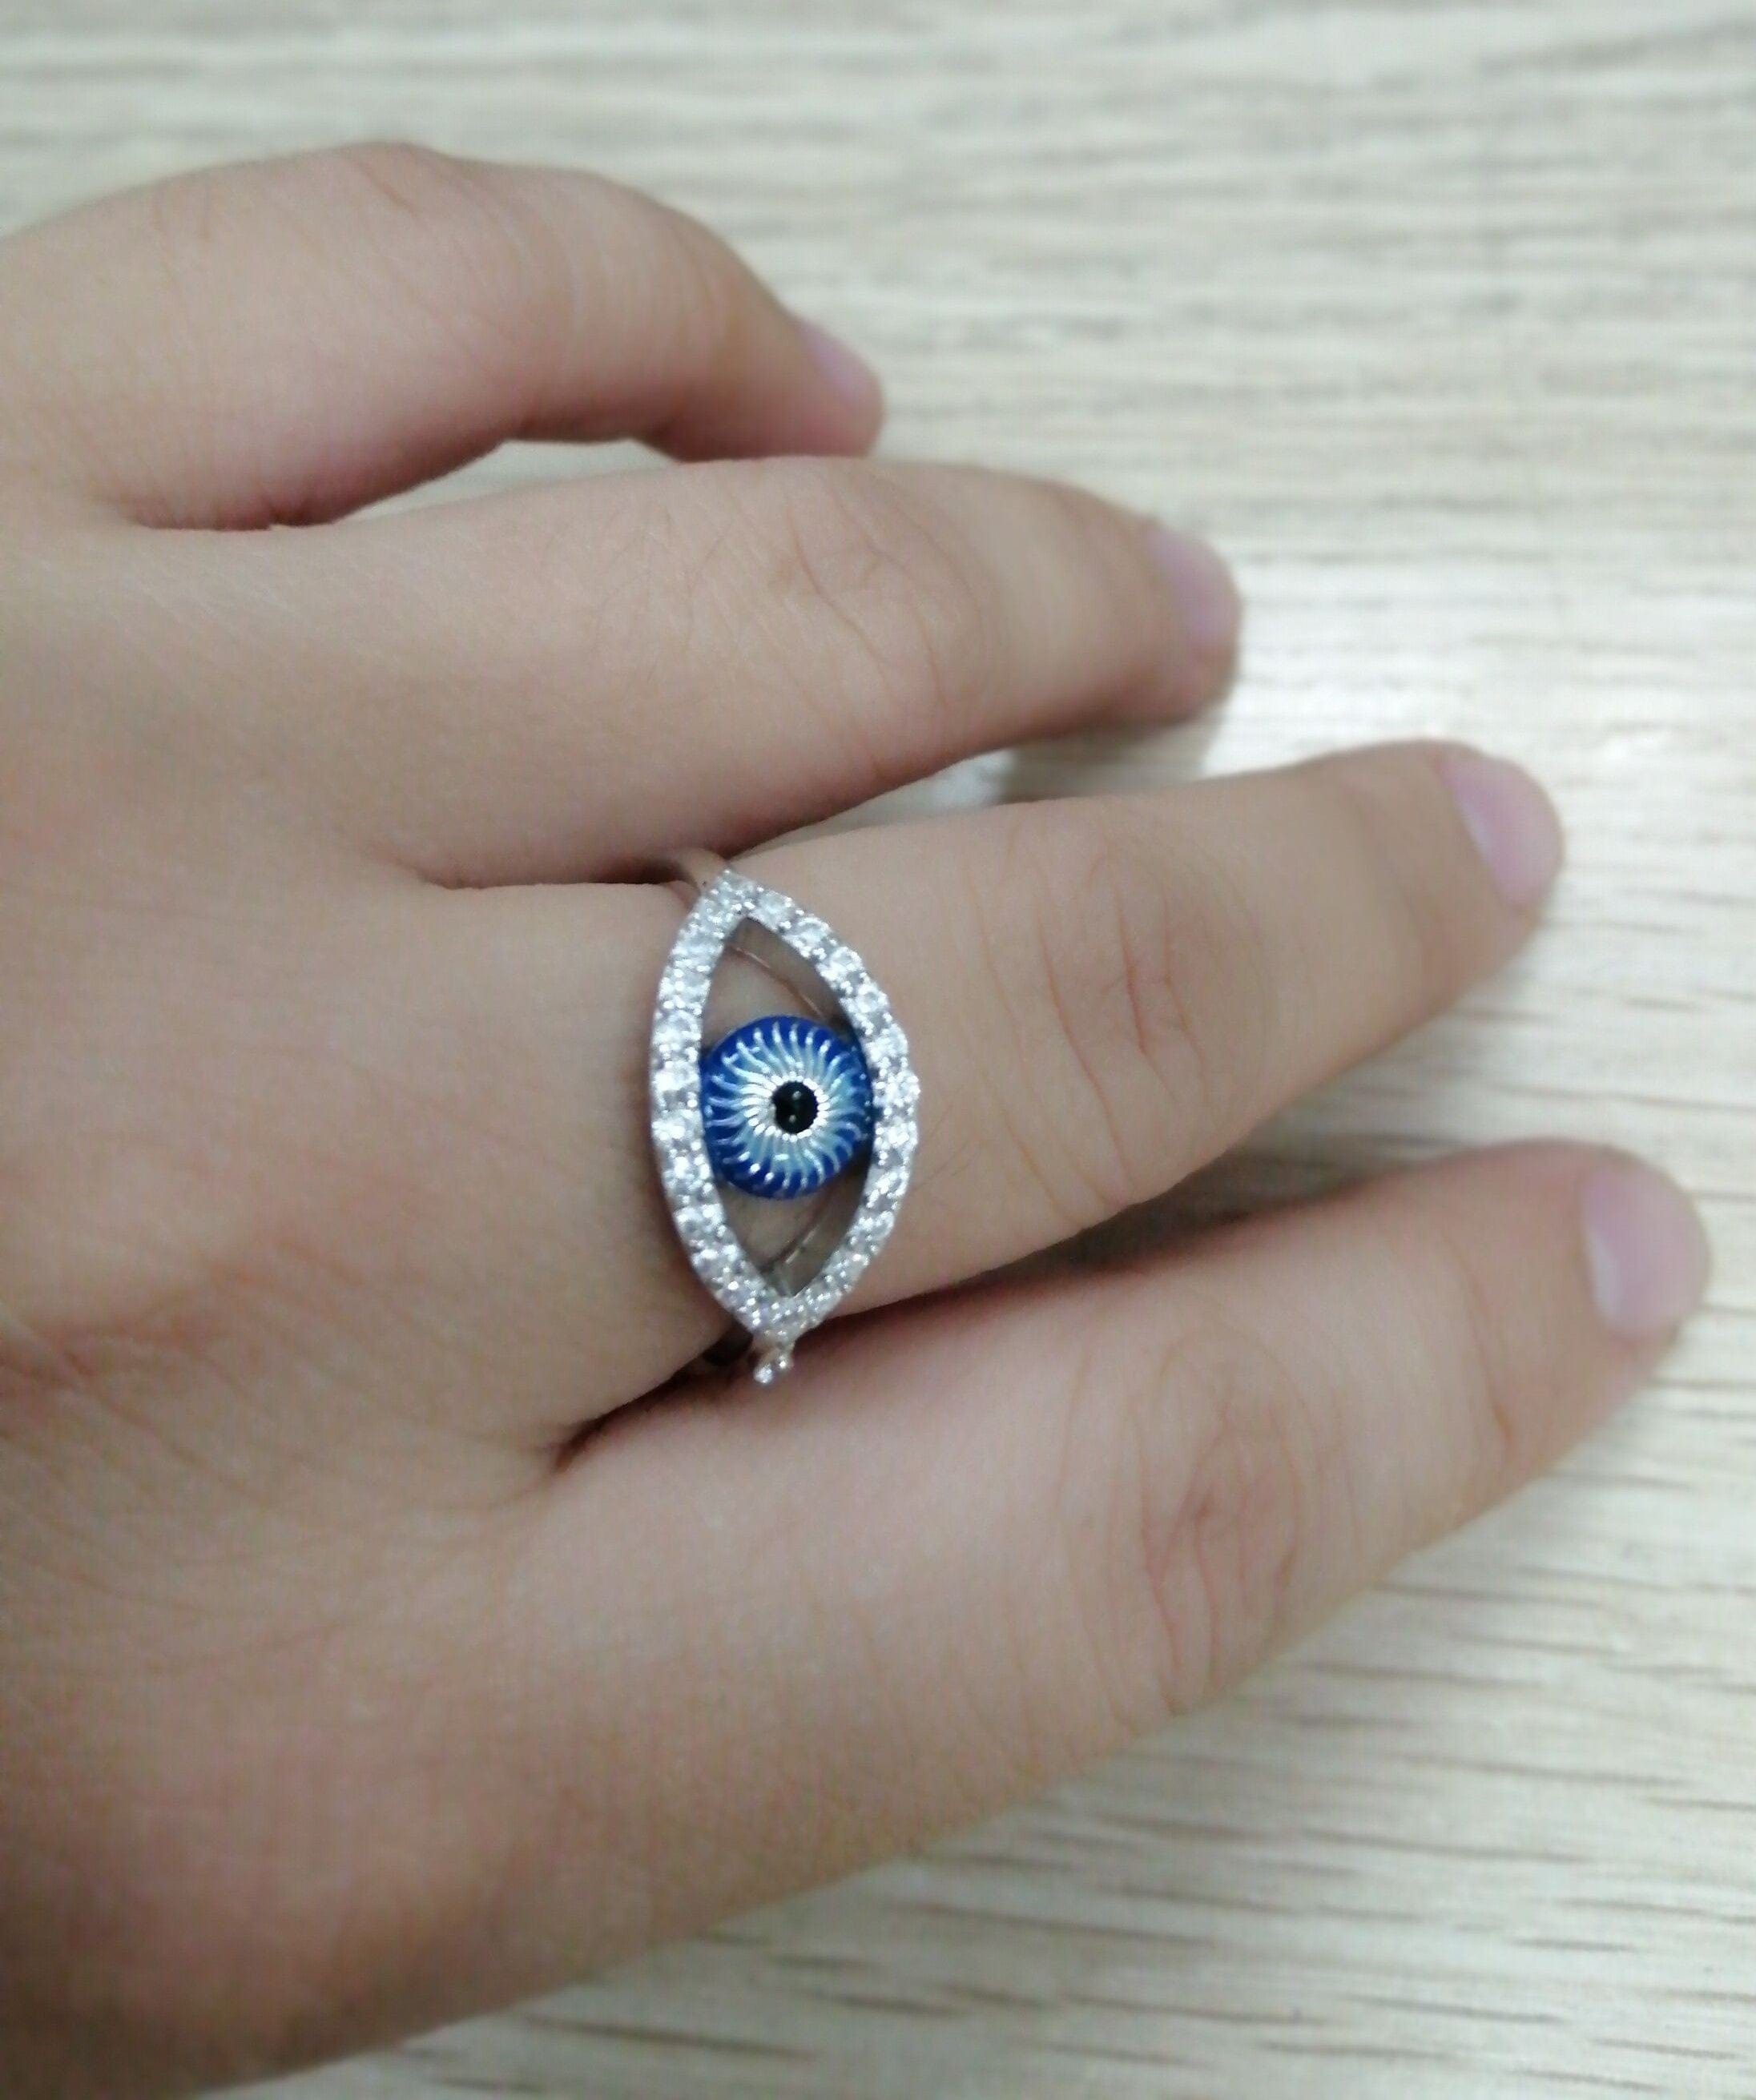 Evil Eye Ring and Pendant Fine Sterling Silver REALISTIC Look! 5A CZ Amazing! - The Pink Pigs, A Compassionate Boutique